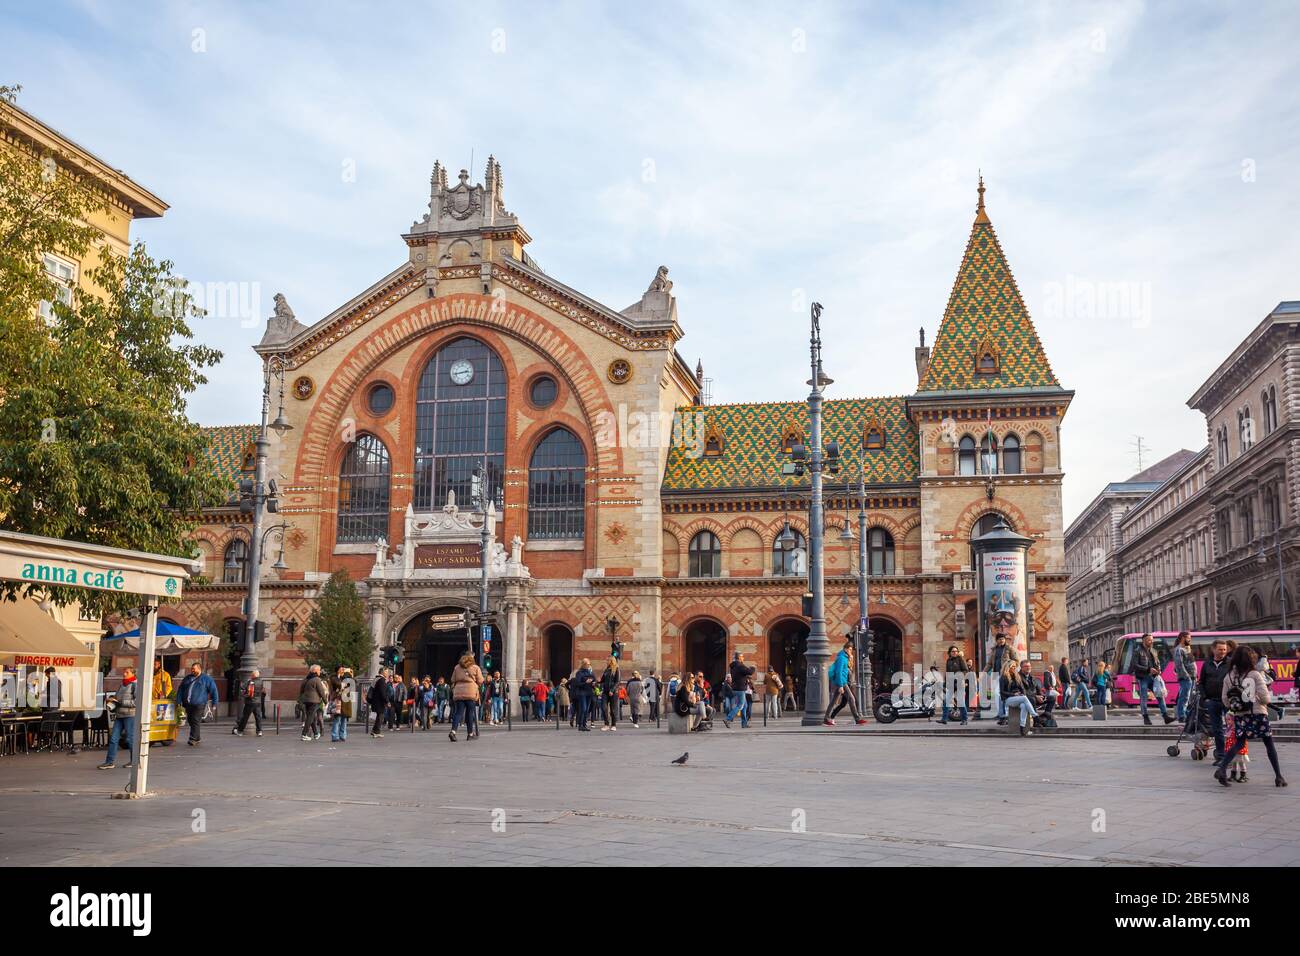 Budapest, Hungary - November 10, 2018: Front view of Great Market Hall Budapest Stock Photo